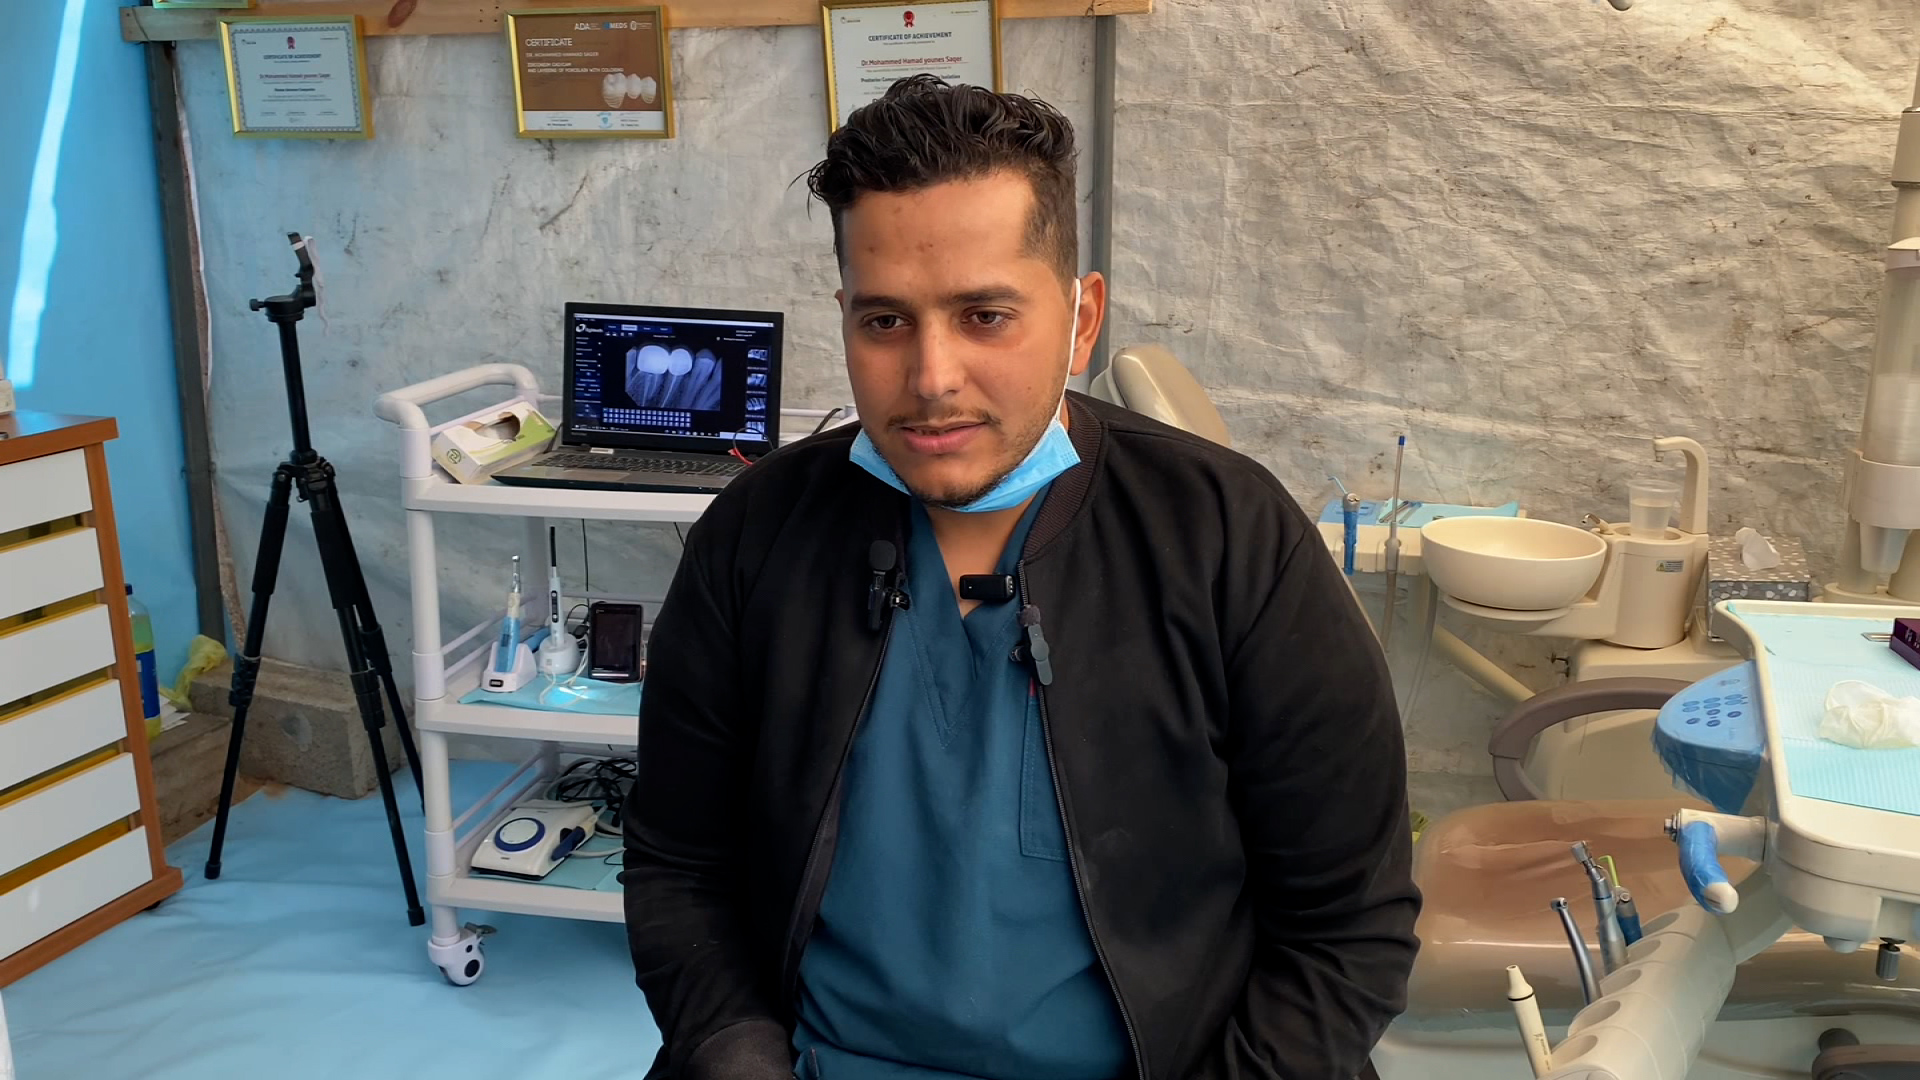 Saqer, a Palestinian dentist, opened his makeshift clinic, which is improvised with wooden poles and plastic sheeting, after Israel’s bombardment damaged his clinic.